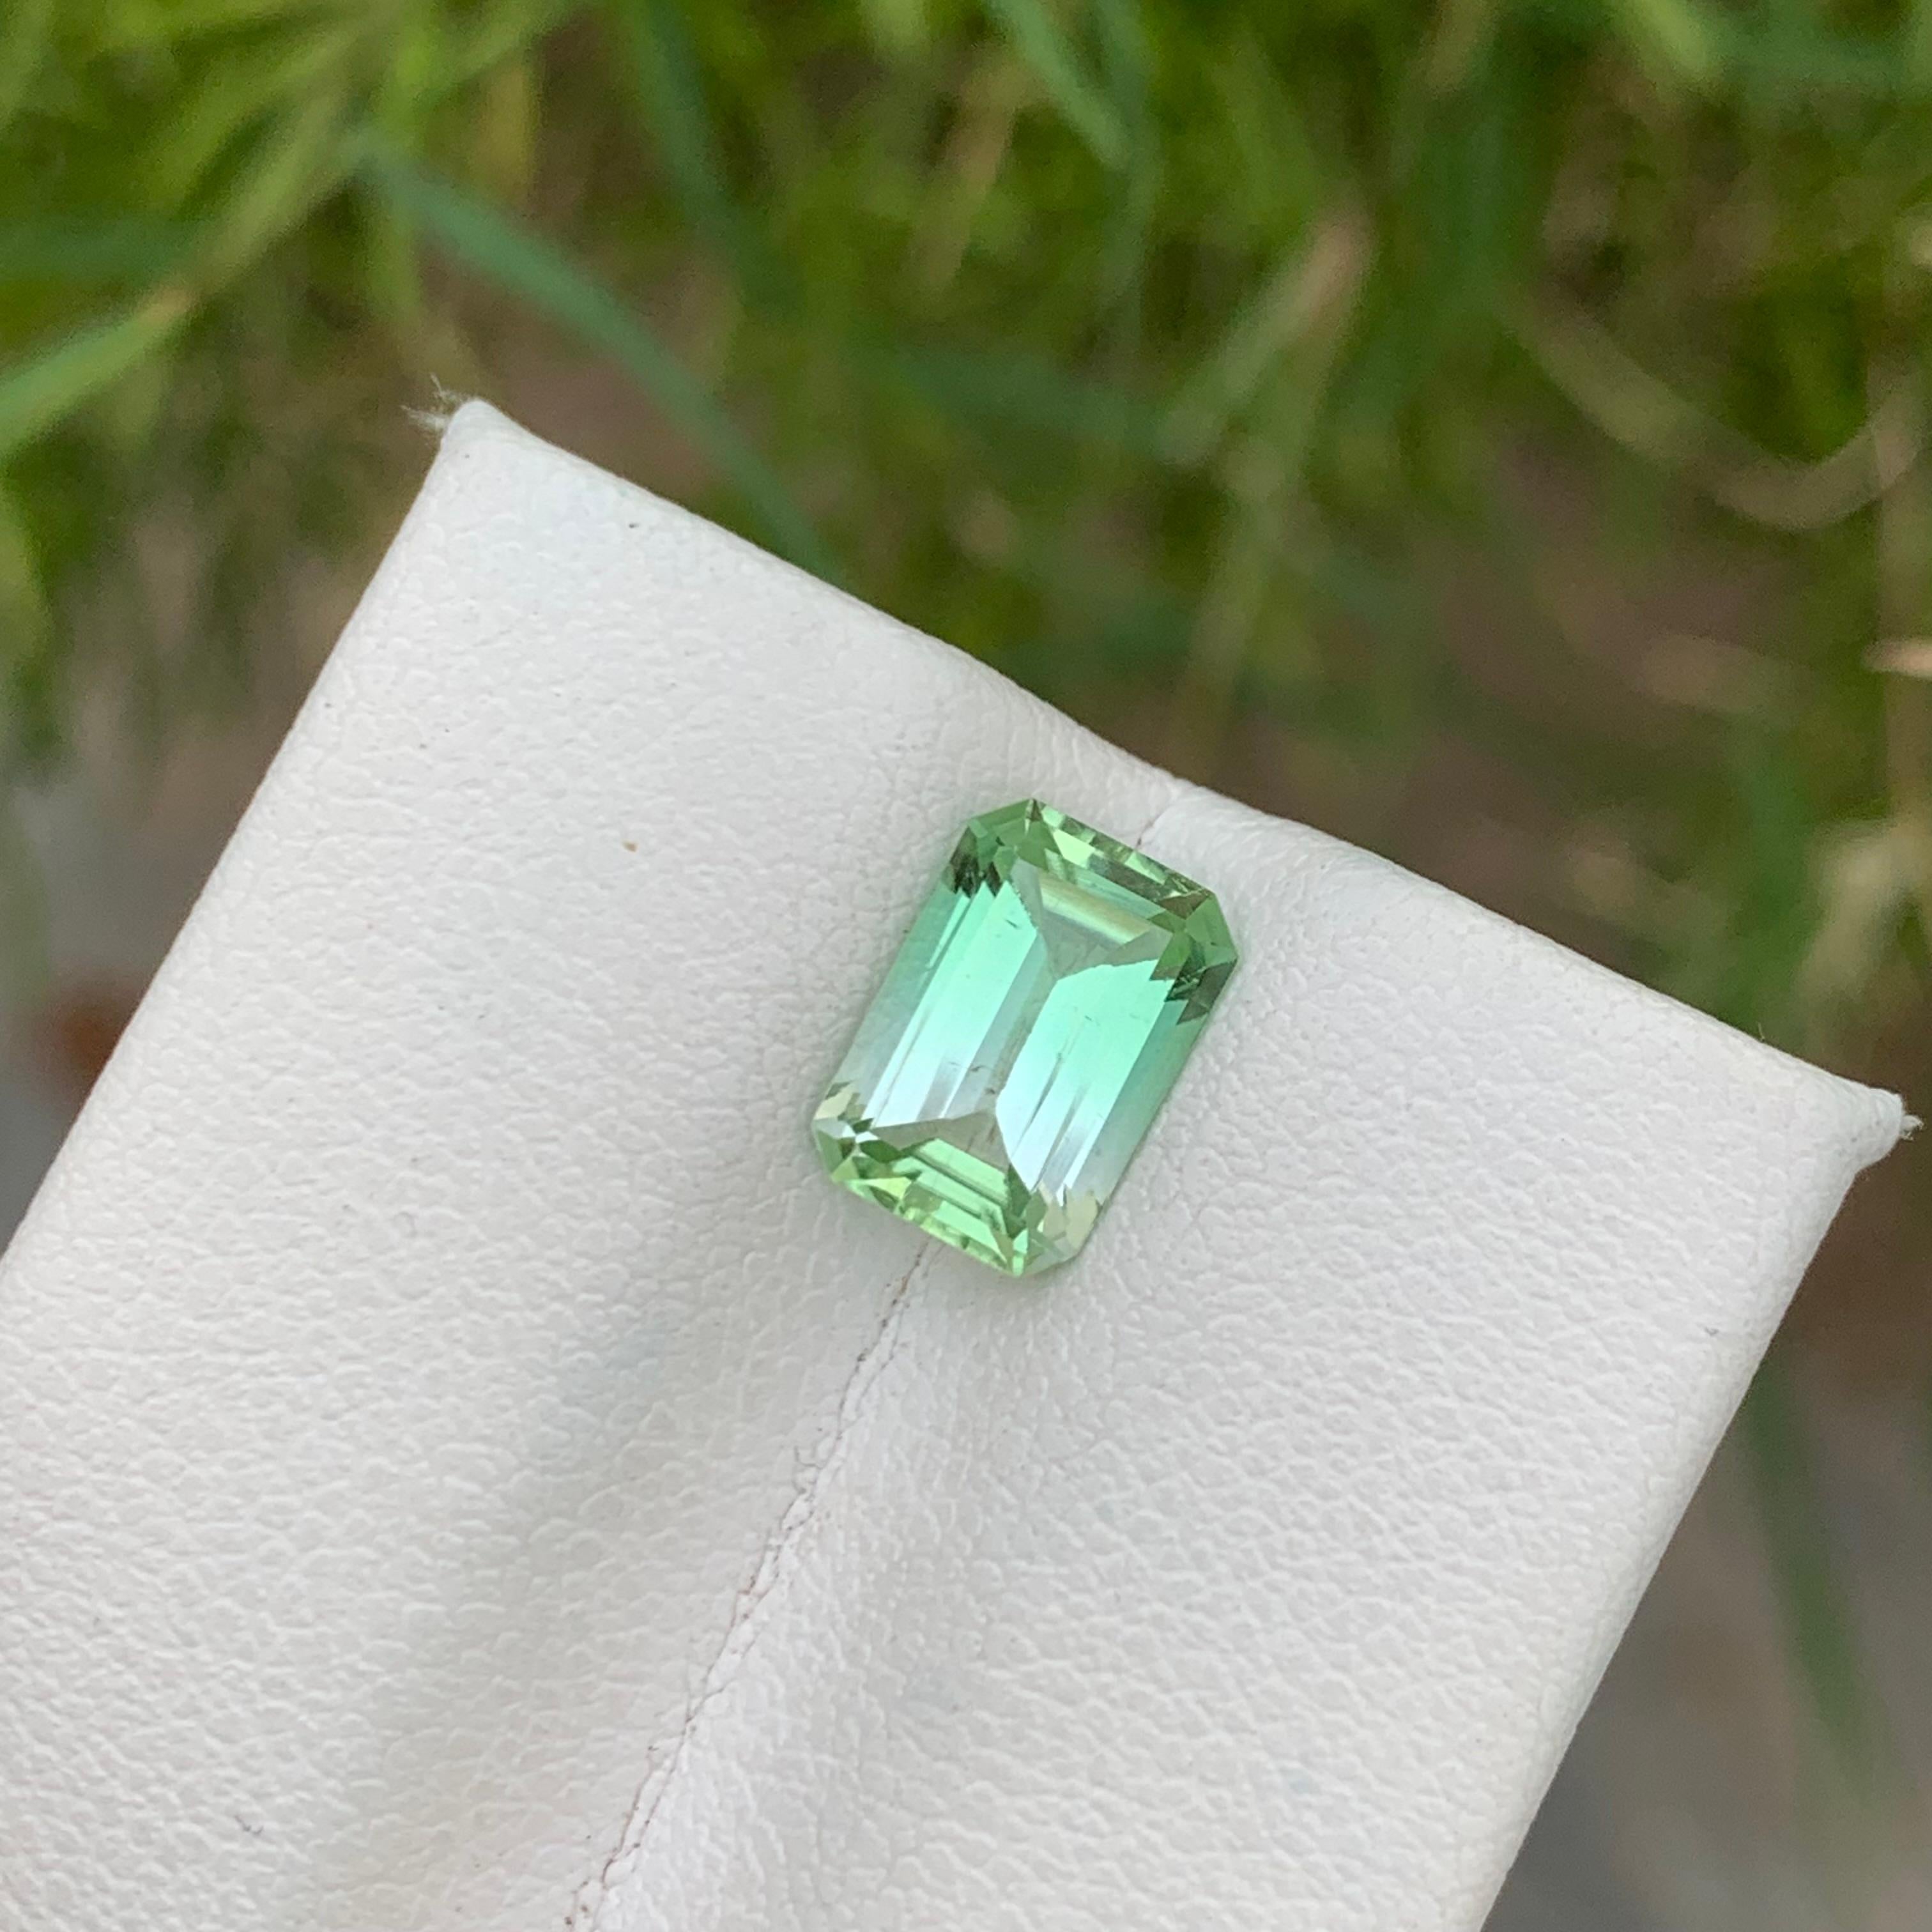 Gorgeous Natural Loose Mint Green Tourmaline Emerald Cut Ring Gemstone 2.0 Carat For Sale 5